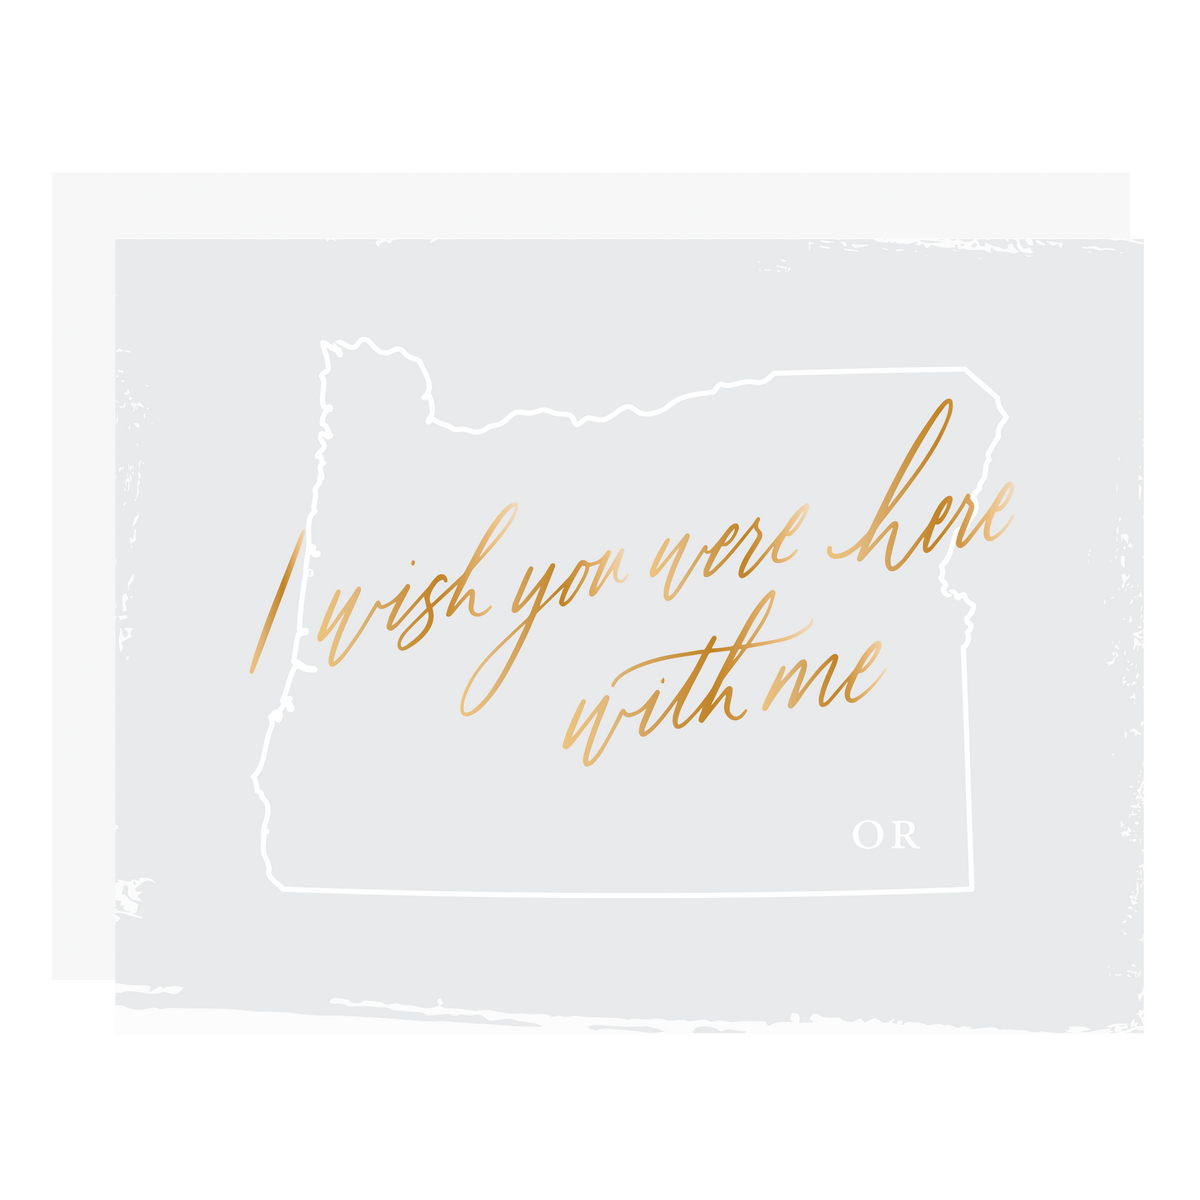 &quot;Wish You Were Here With Me - Oregon&quot;, letterpress printed by hand with gold foil. 